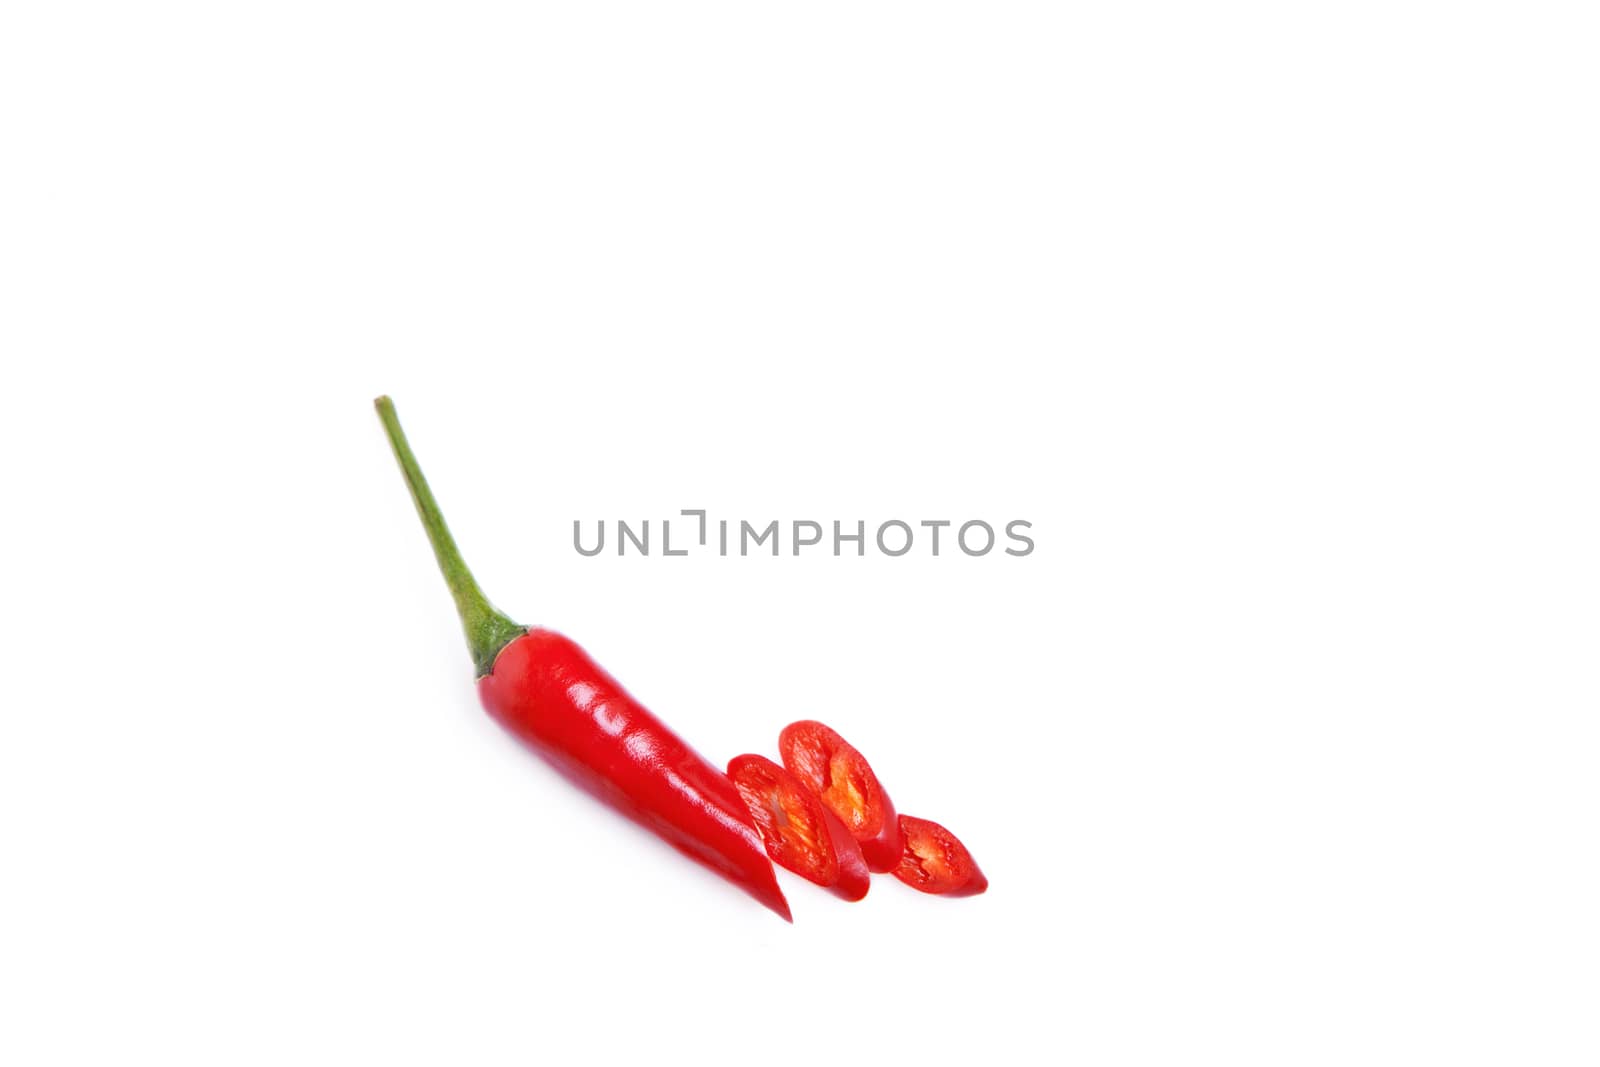 A fresh Red Chili Pepper on a white surface